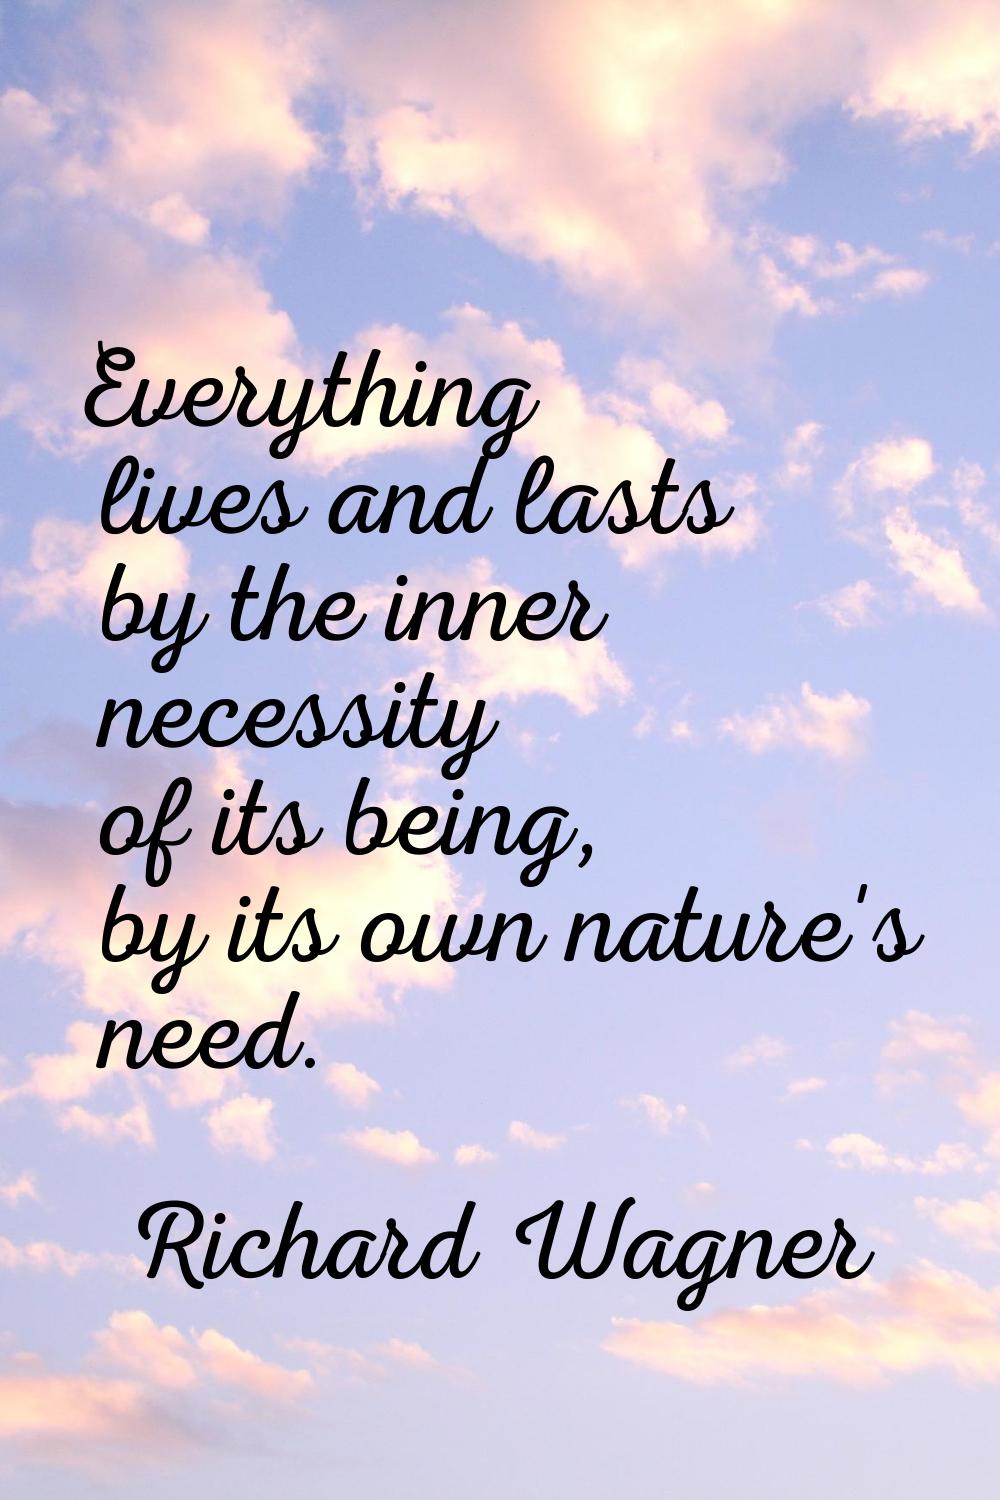 Everything lives and lasts by the inner necessity of its being, by its own nature's need.